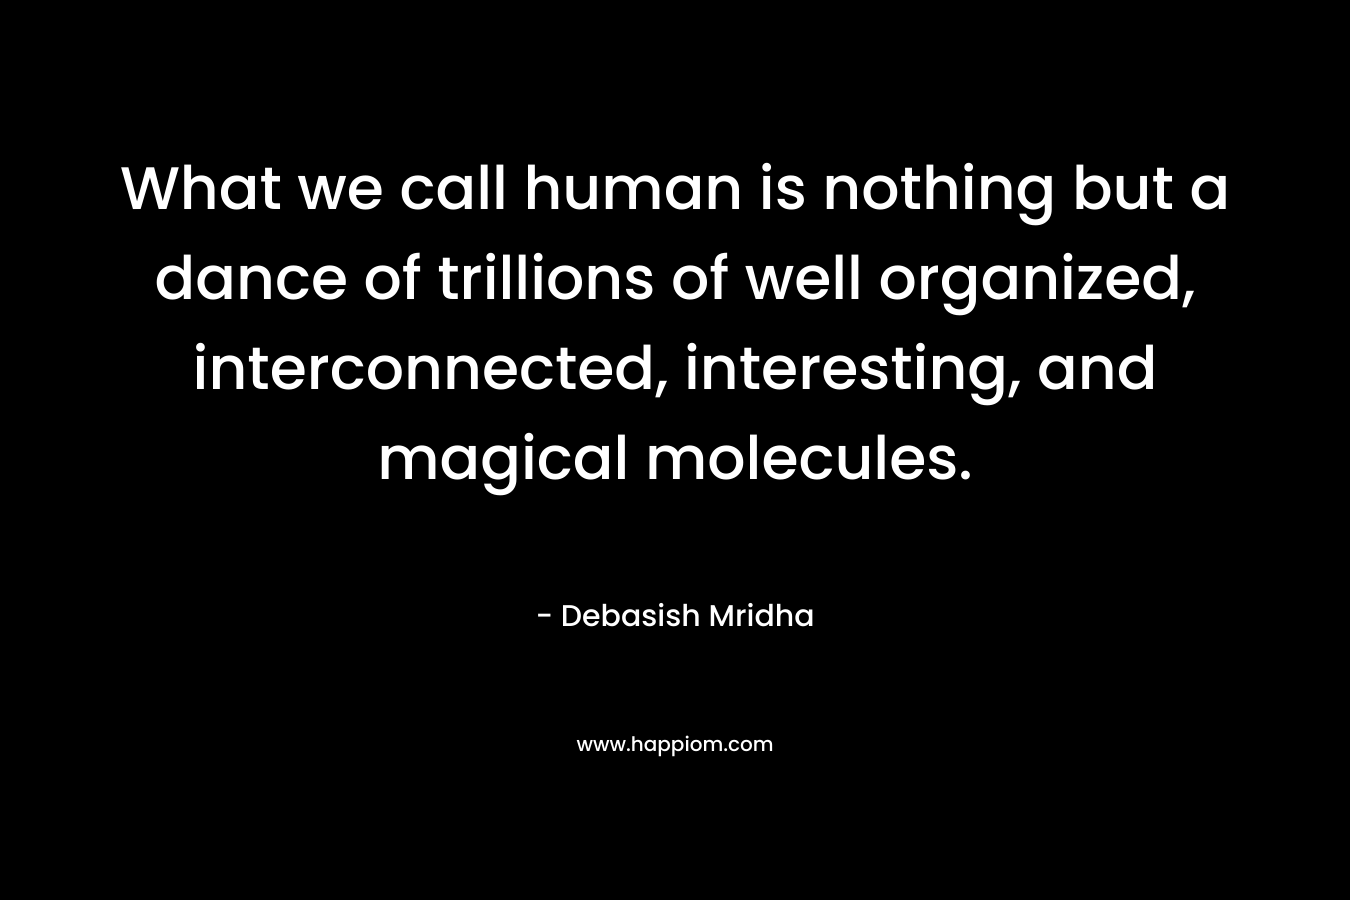 What we call human is nothing but a dance of trillions of well organized, interconnected, interesting, and magical molecules.